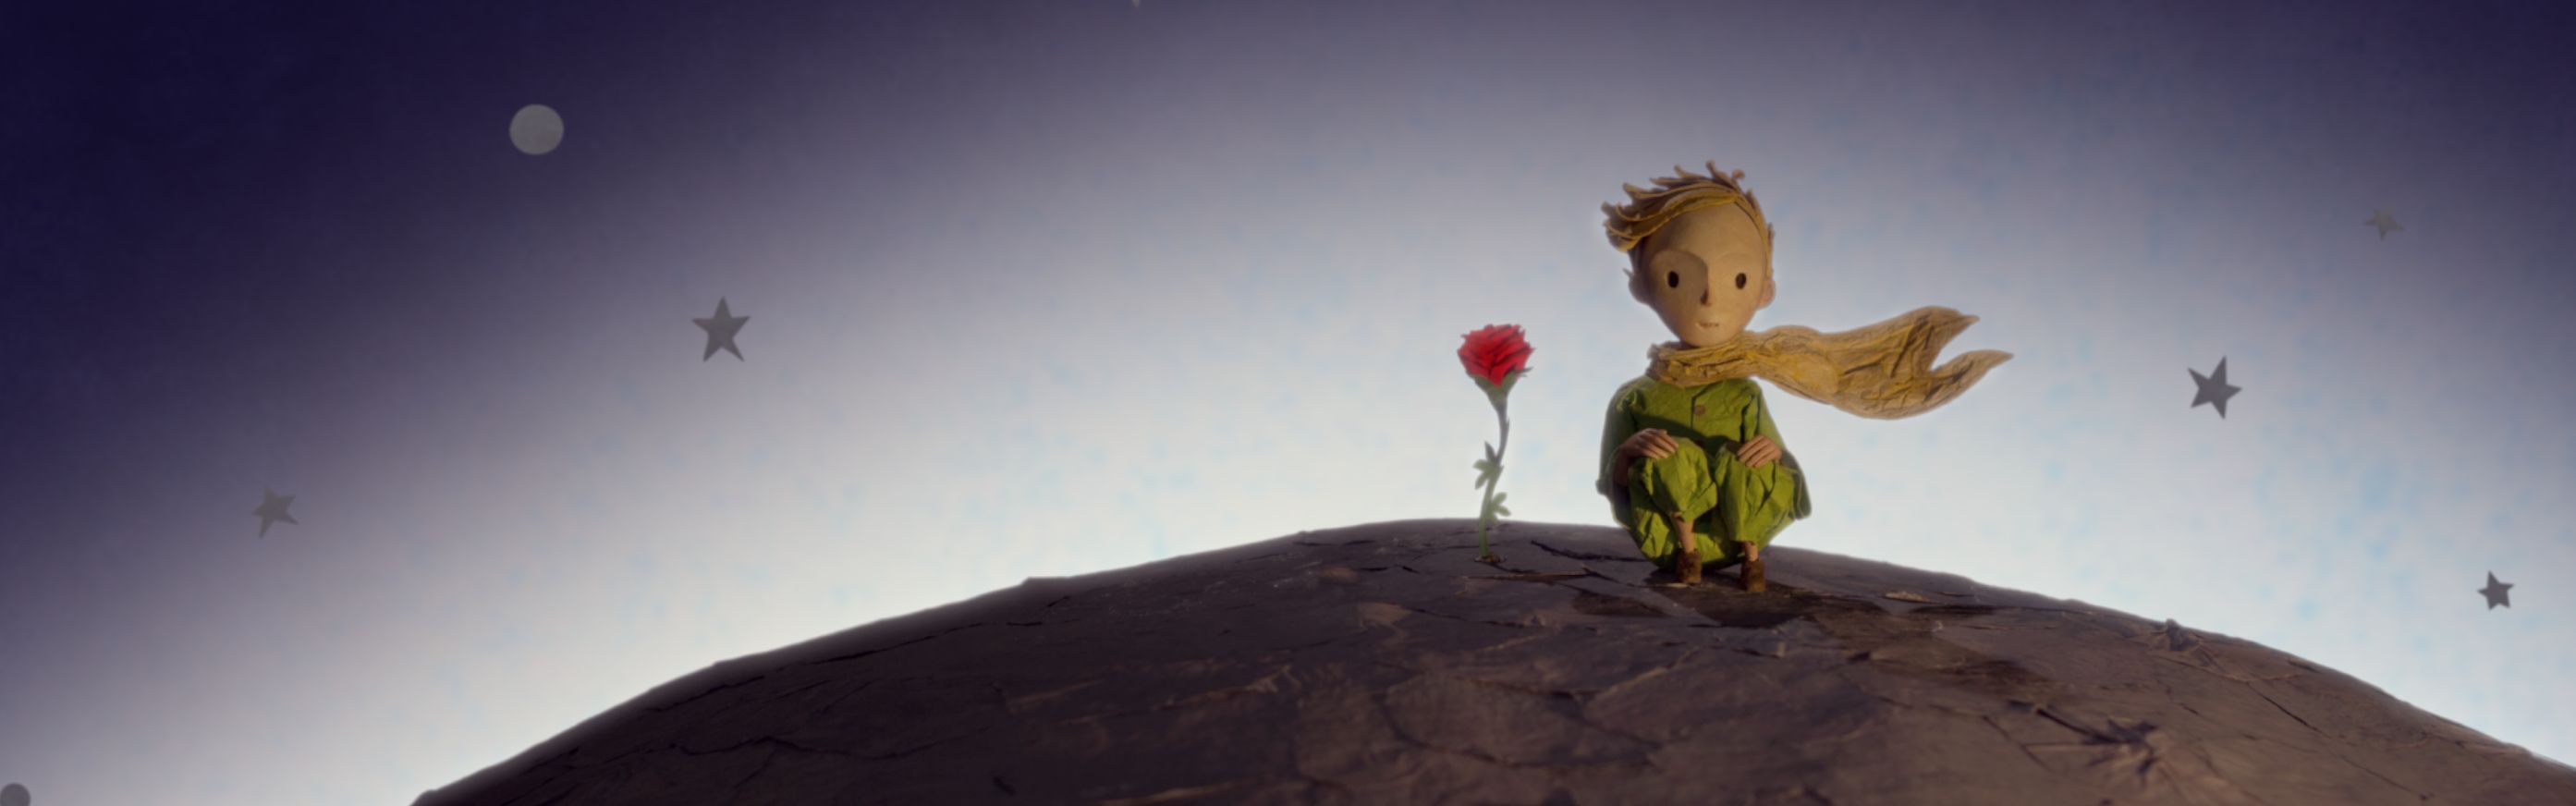 the little prince, movie